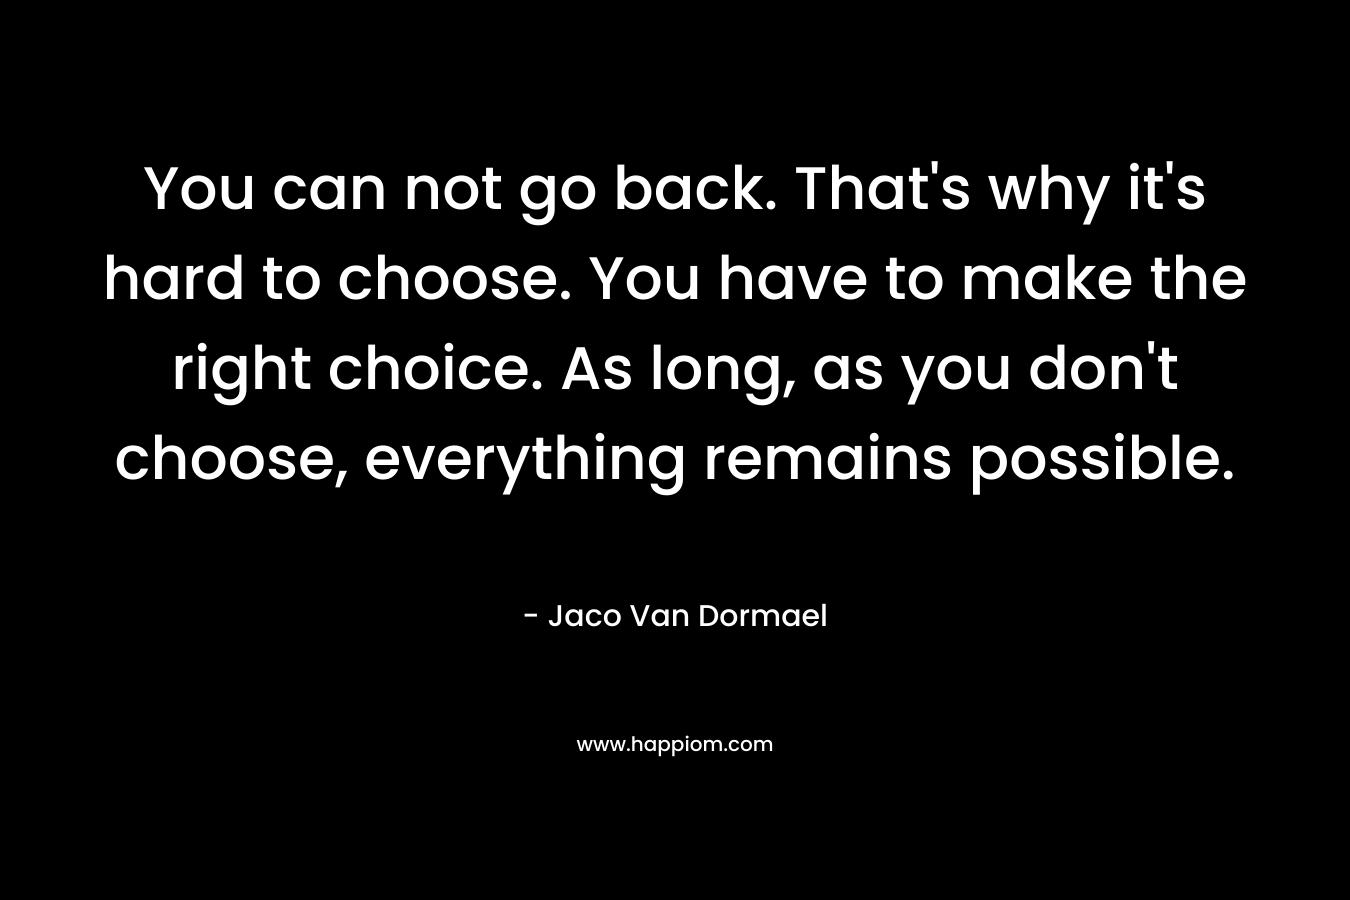 You can not go back. That's why it's hard to choose. You have to make the right choice. As long, as you don't choose, everything remains possible.